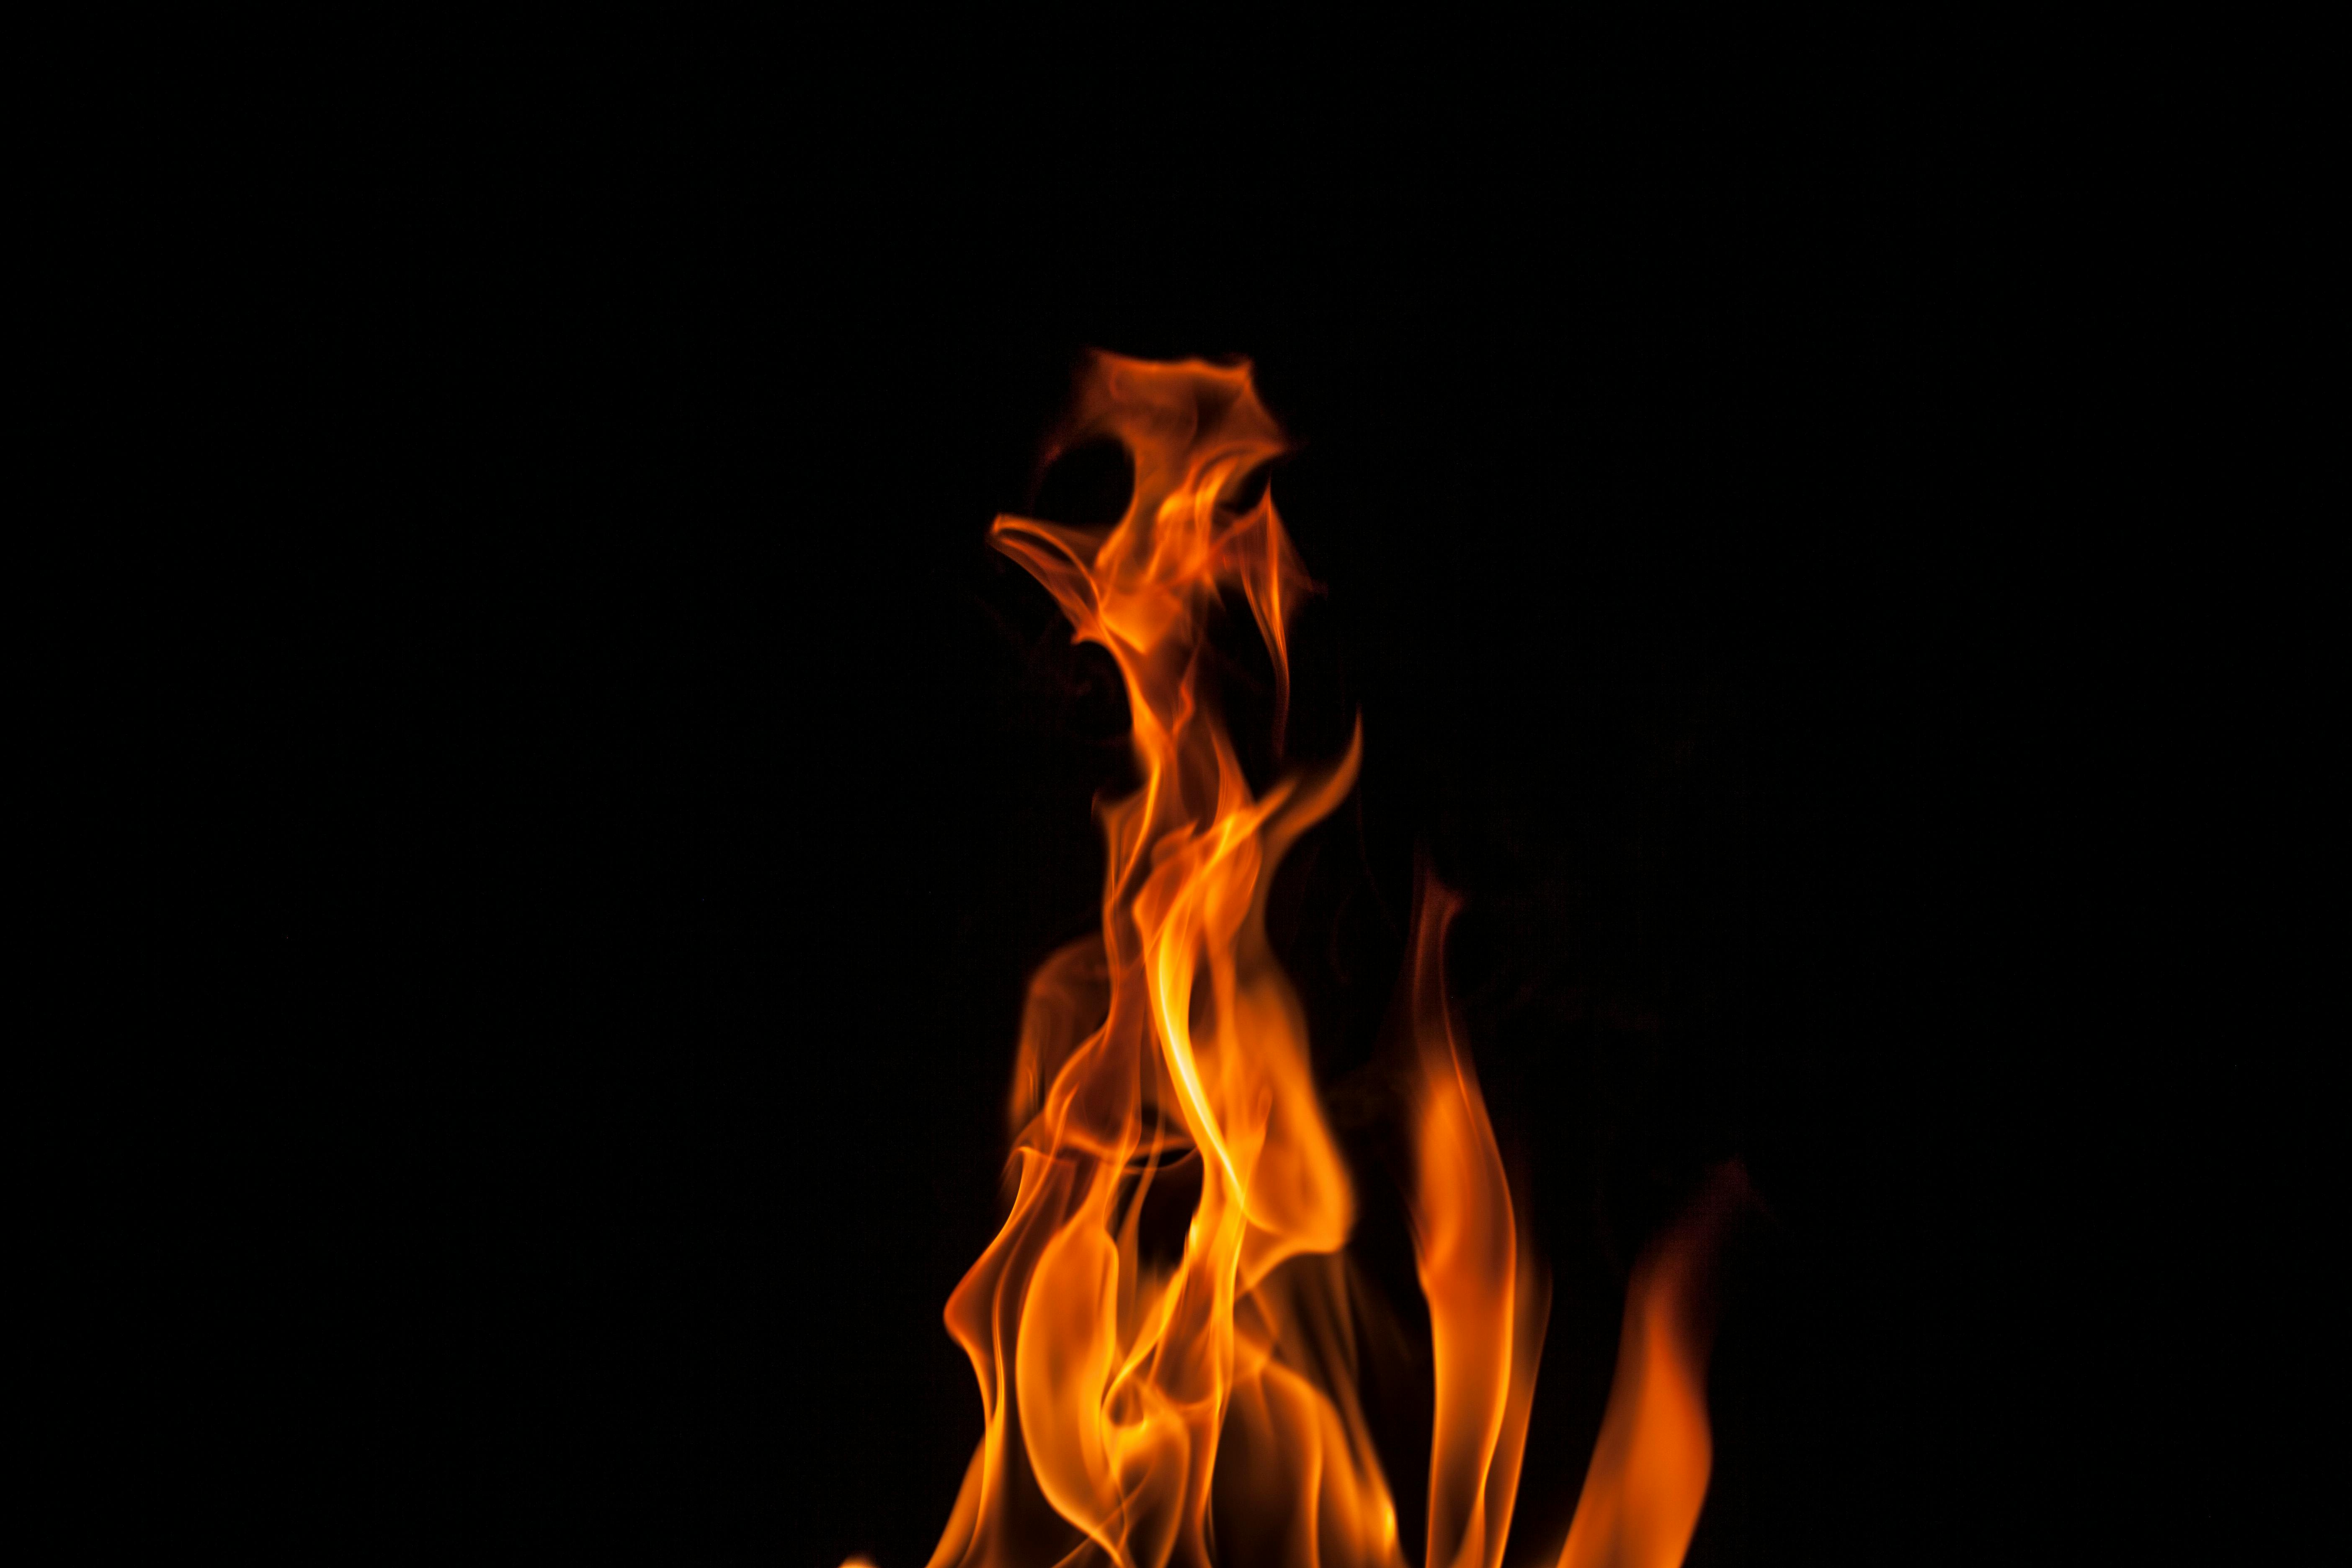 Fire Flames IPhone Wallpaper  IPhone Wallpapers  iPhone Wallpapers